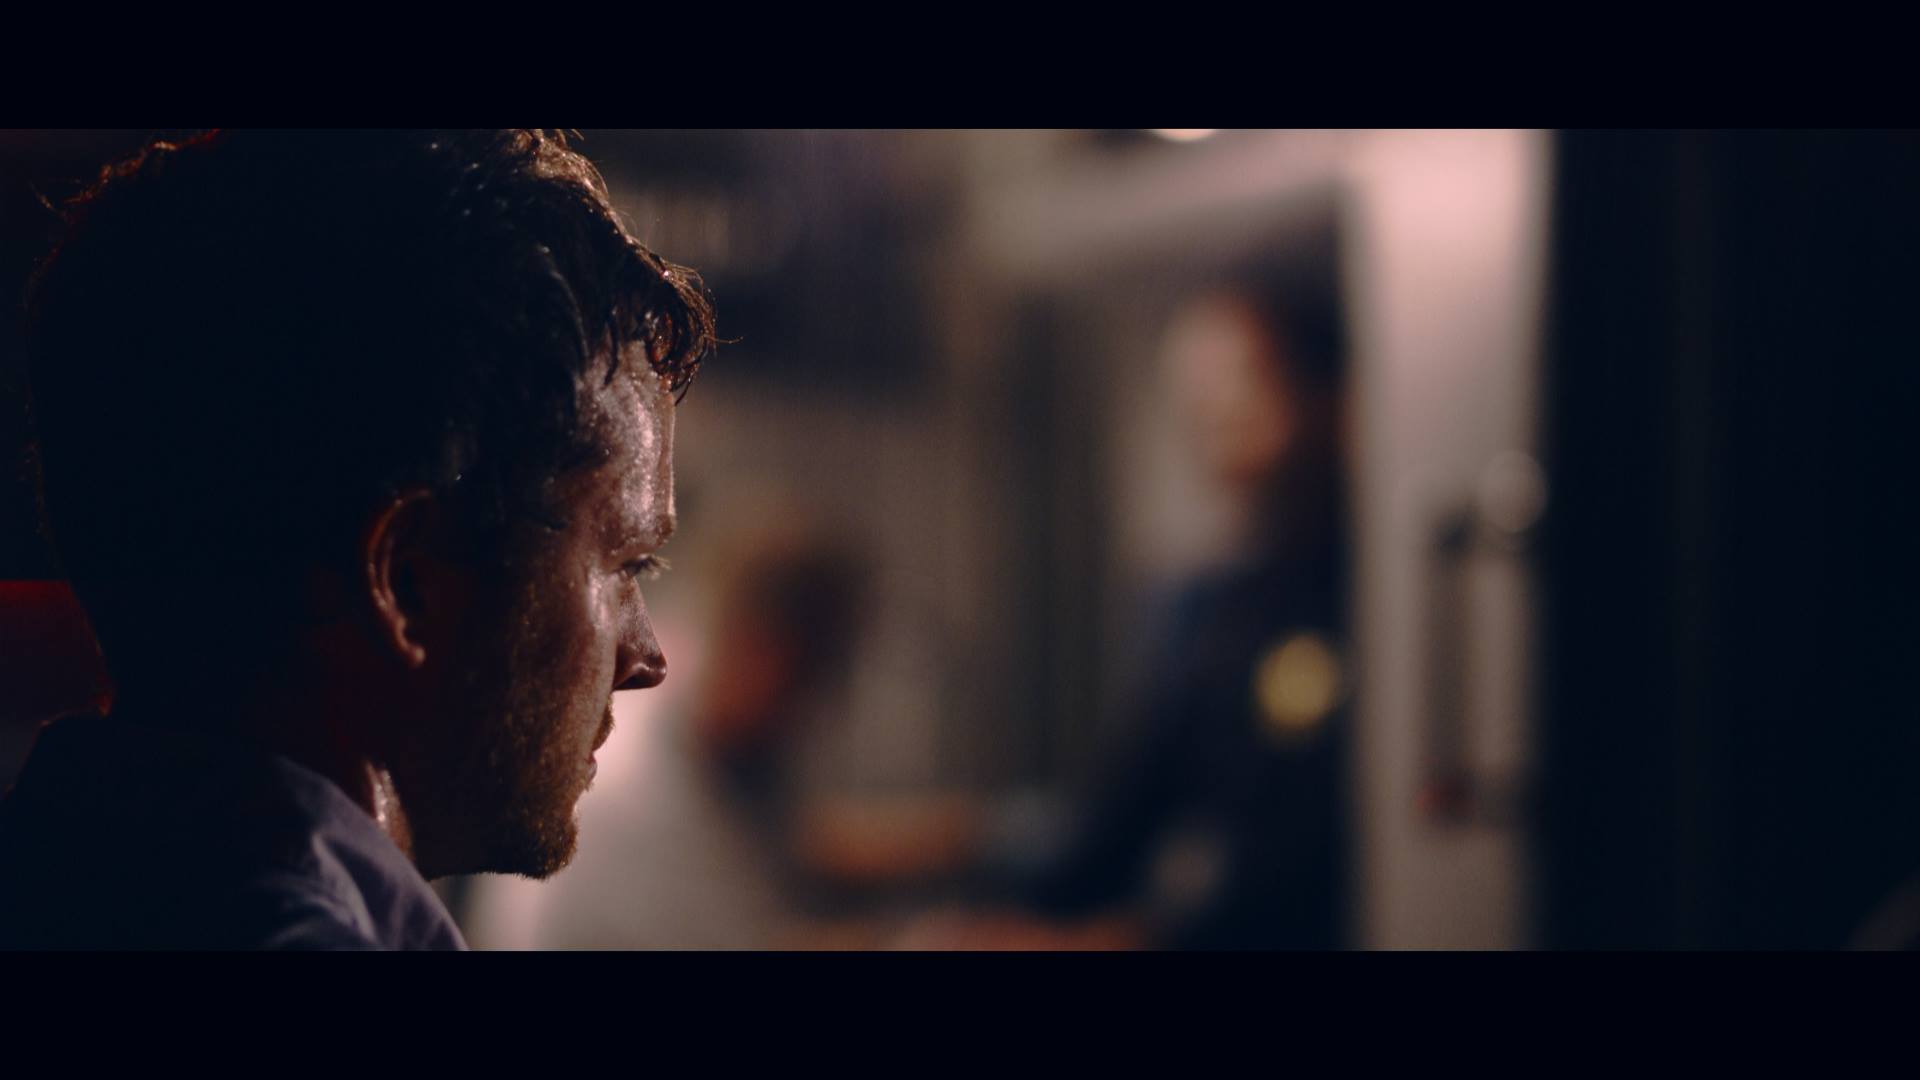 From the short film TWO-ELEVEN!